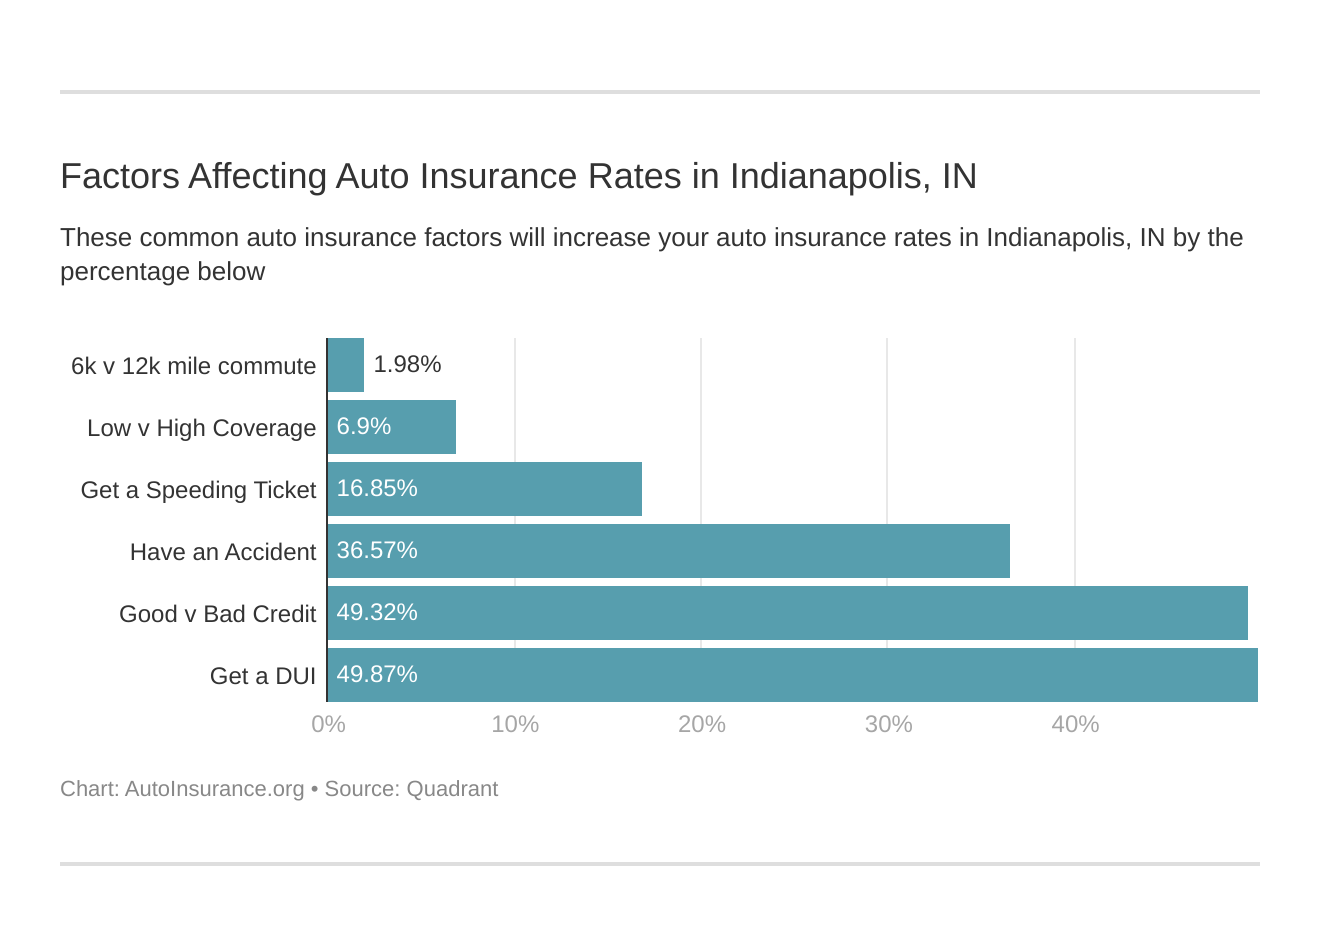 Factors Affecting Auto Insurance Rates in Indianapolis, IN